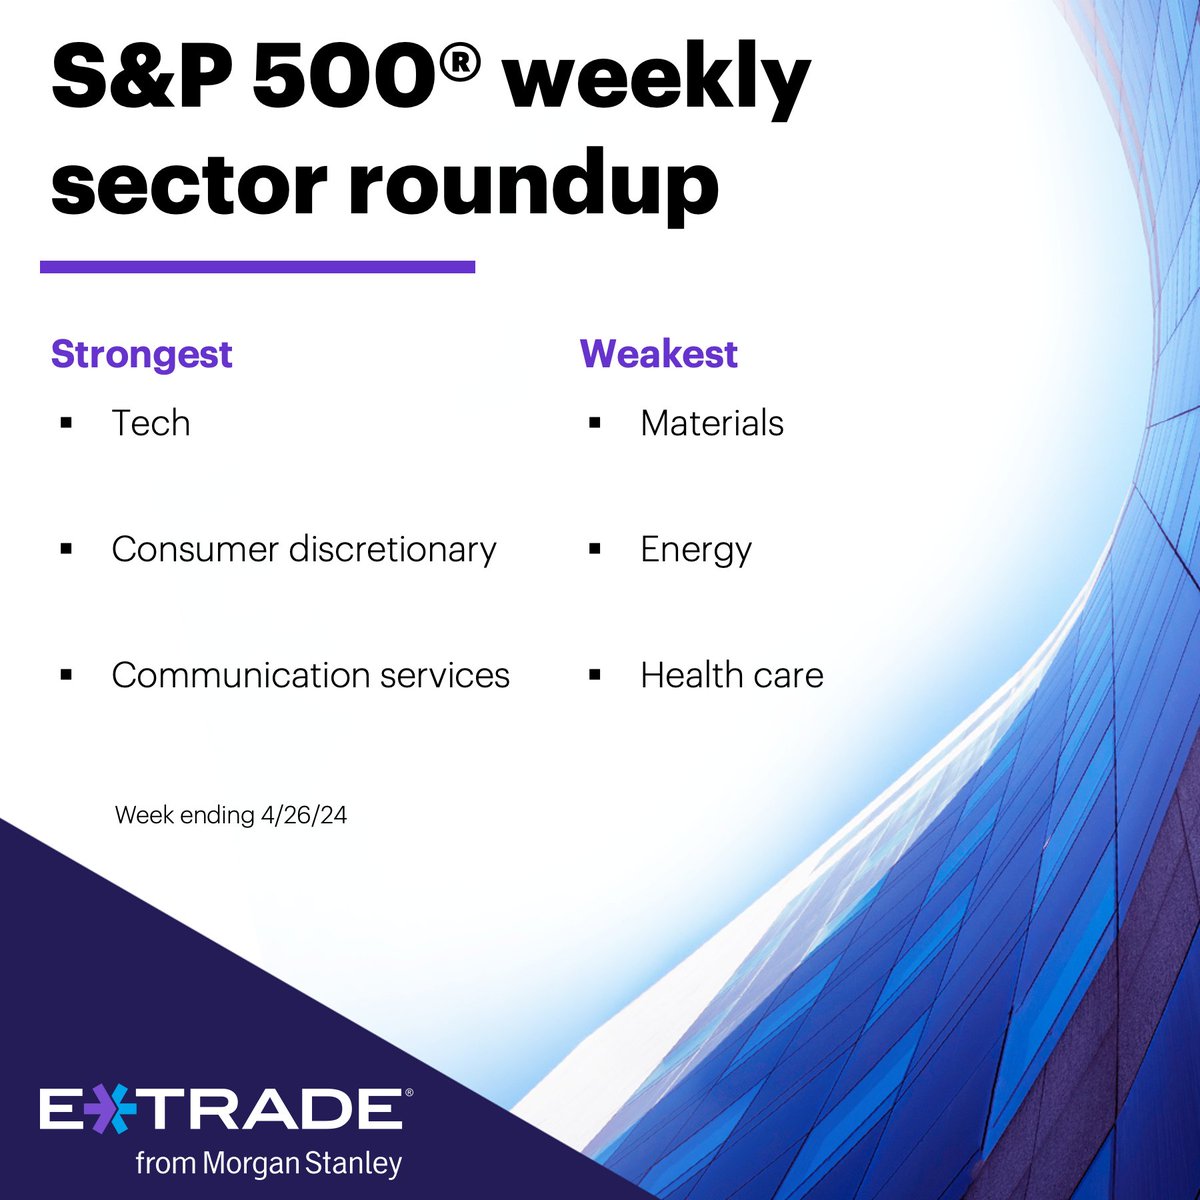 Catch up on the market and what’s on deck for the Street for the rest of the week. #ETRADEdashboard bit.ly/4bheRhG